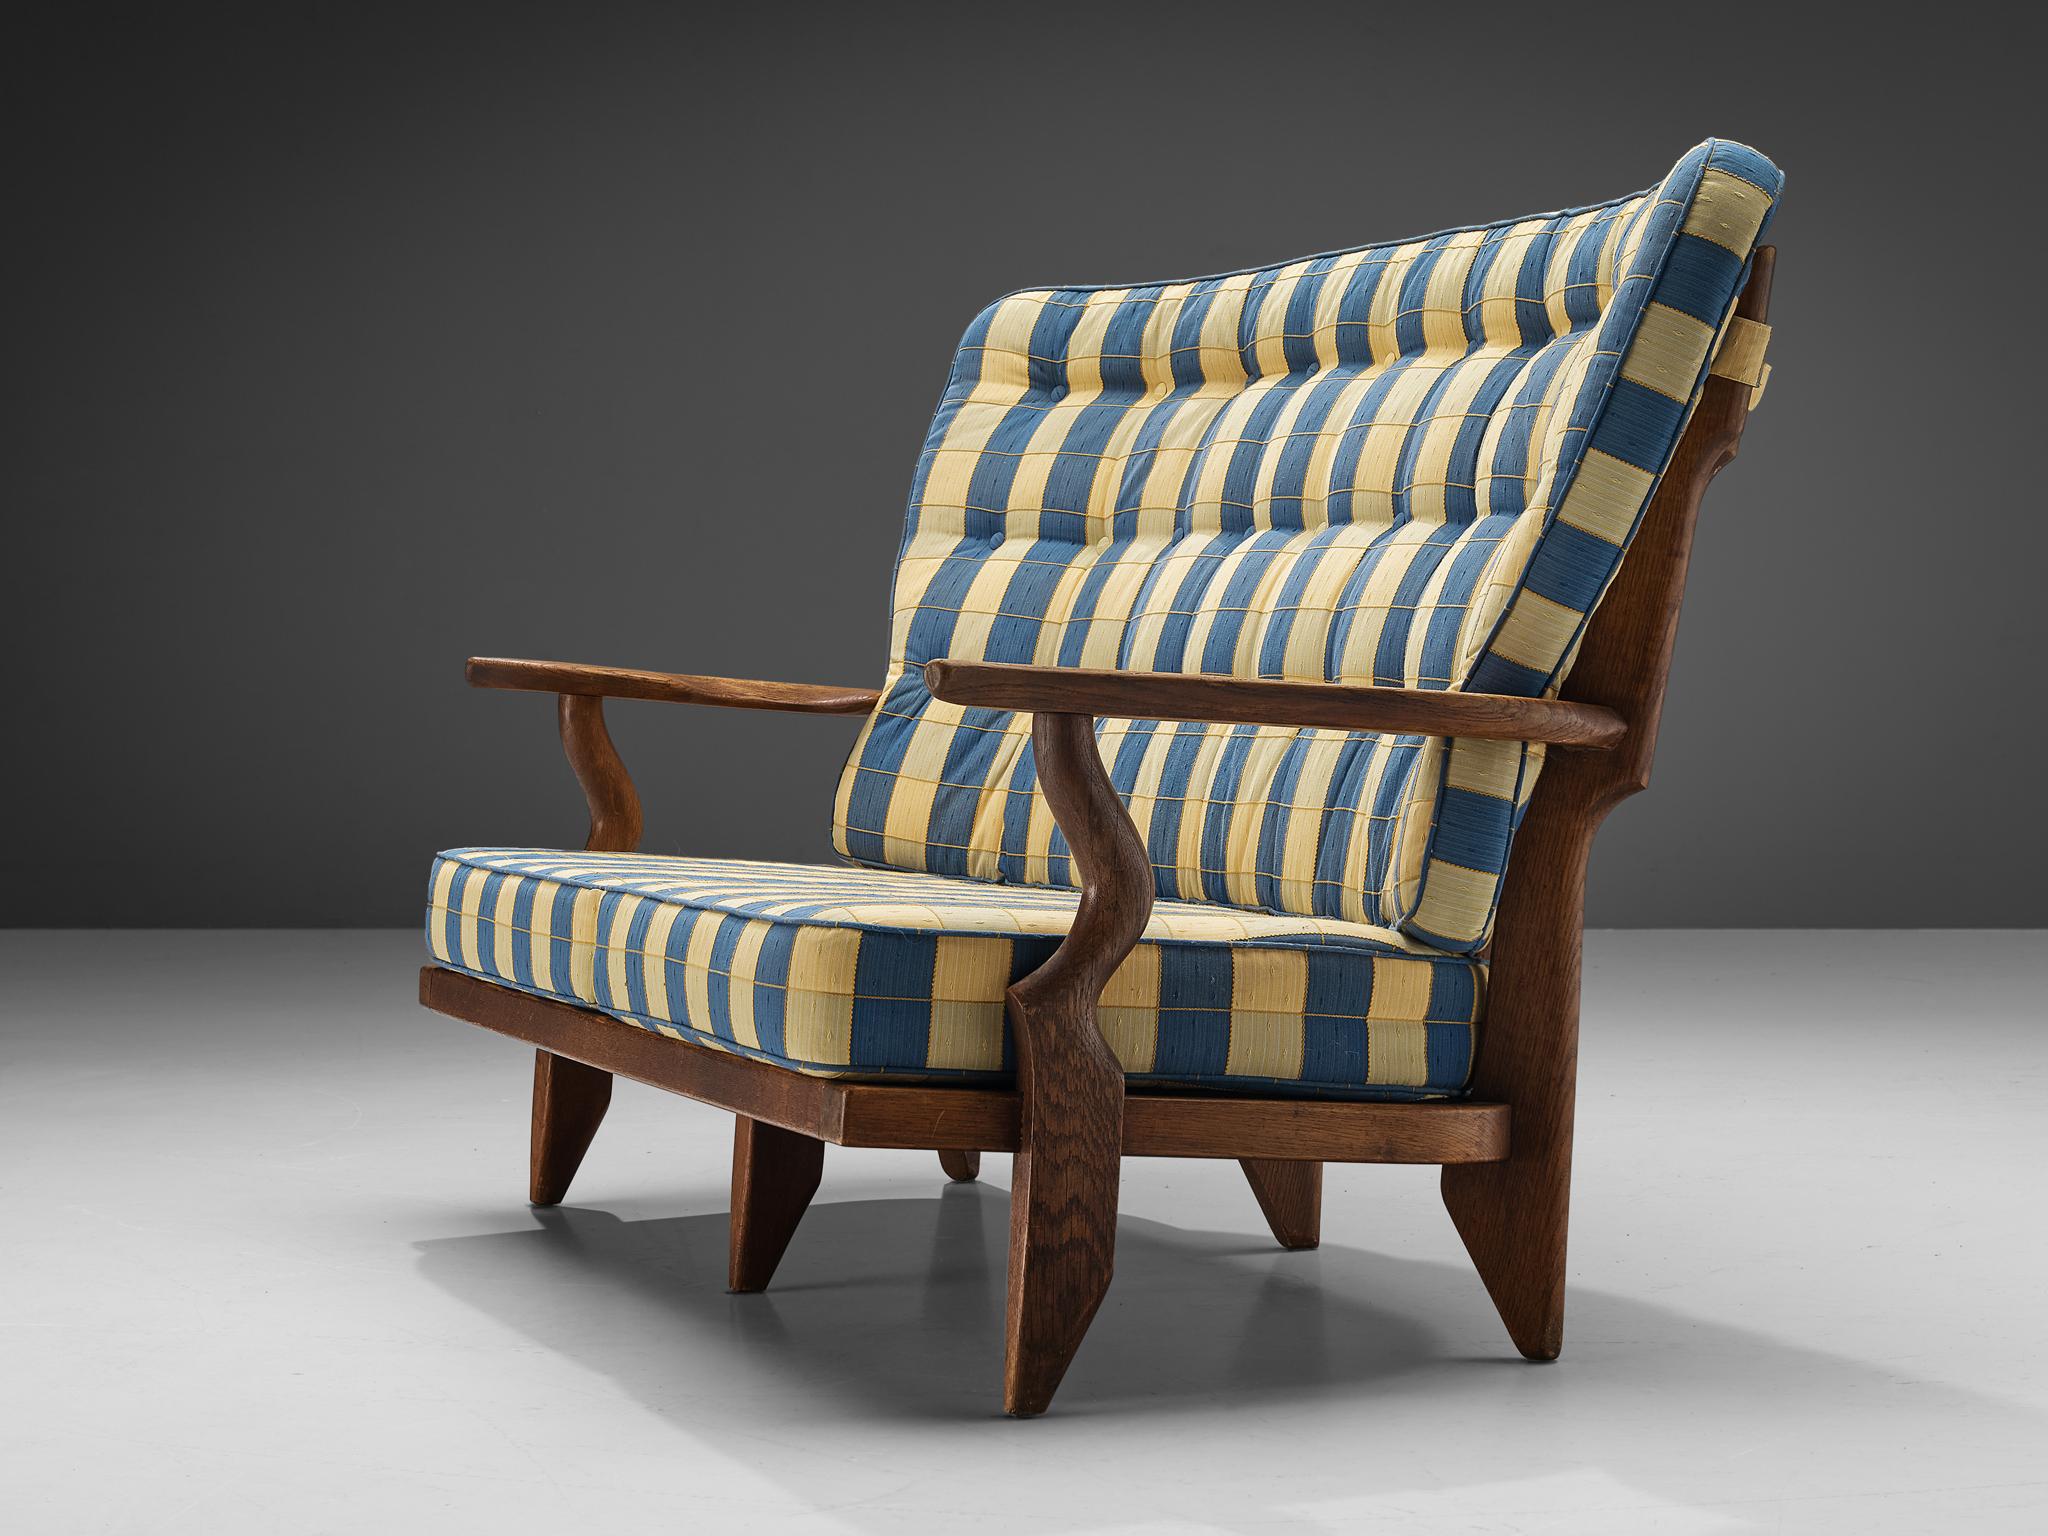 Guillerme & Chambron ´Juliette´ Sofa in Oak and Striped Upholstery 1